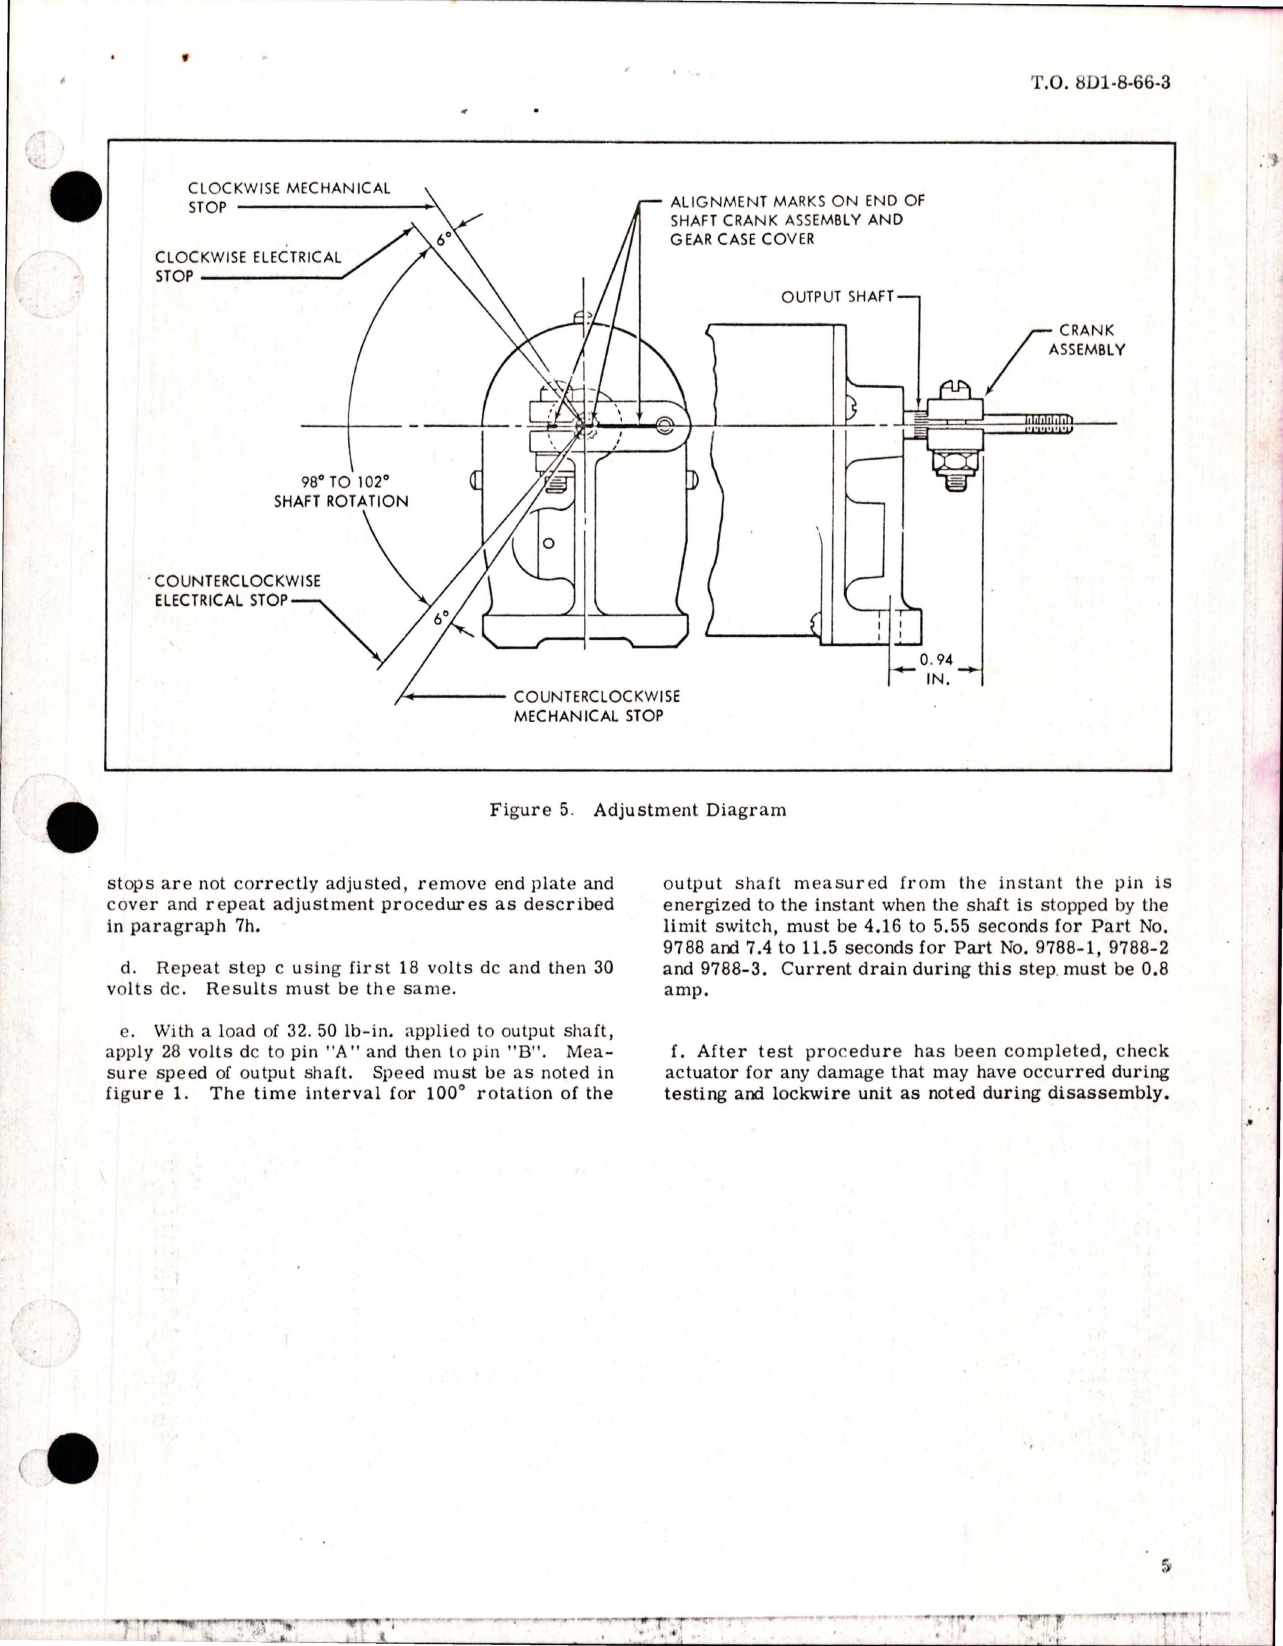 Sample page 5 from AirCorps Library document: Overhaul with Parts Breakdown for Rotary Actuator - Parts 9788, 9788-1, 9788-2, 9788-3